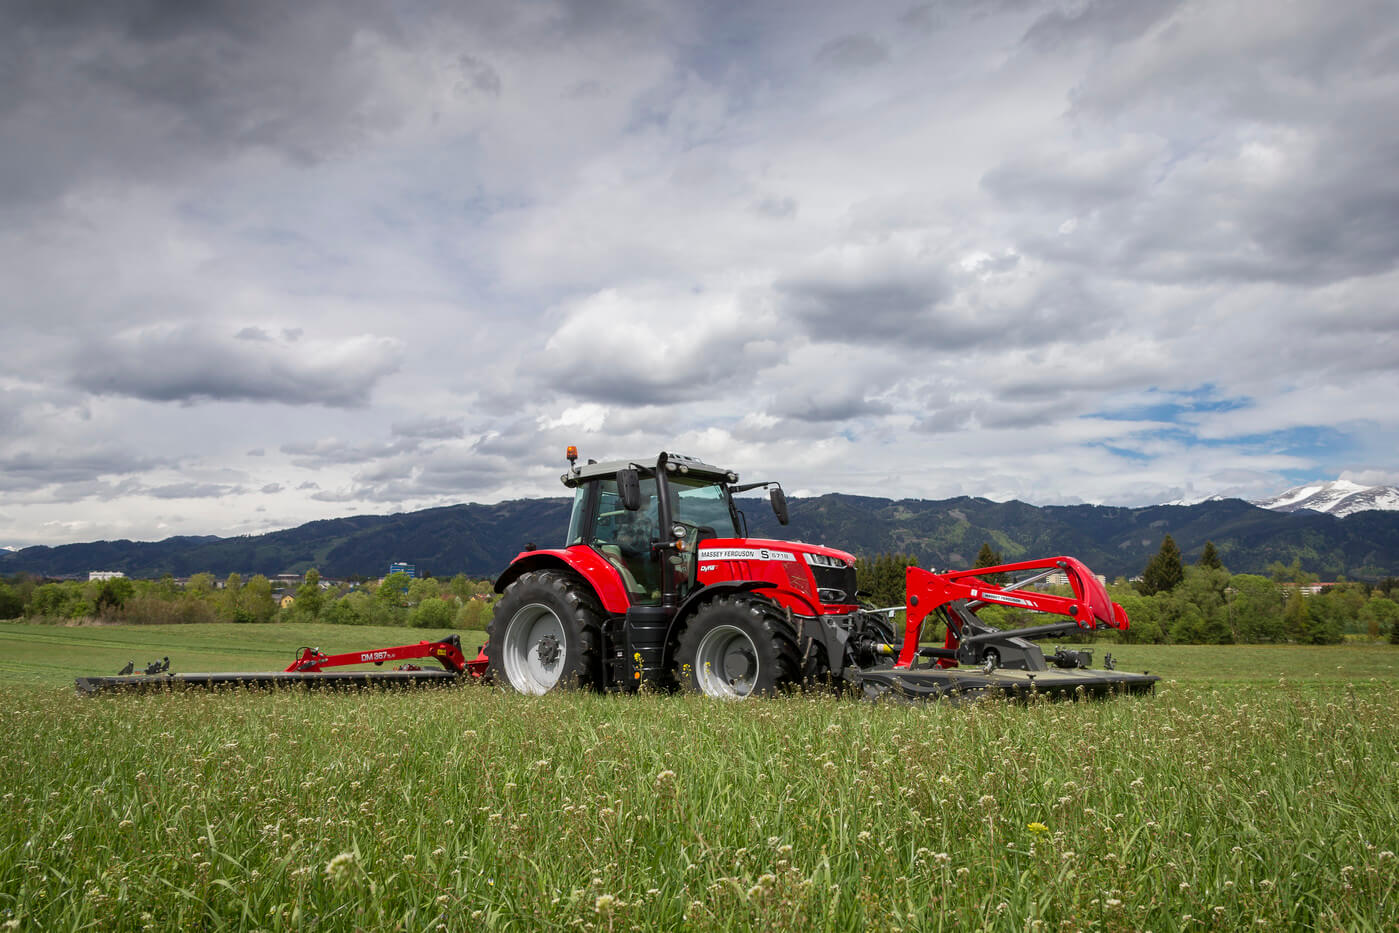 Precise mowing – even under difficult conditions 